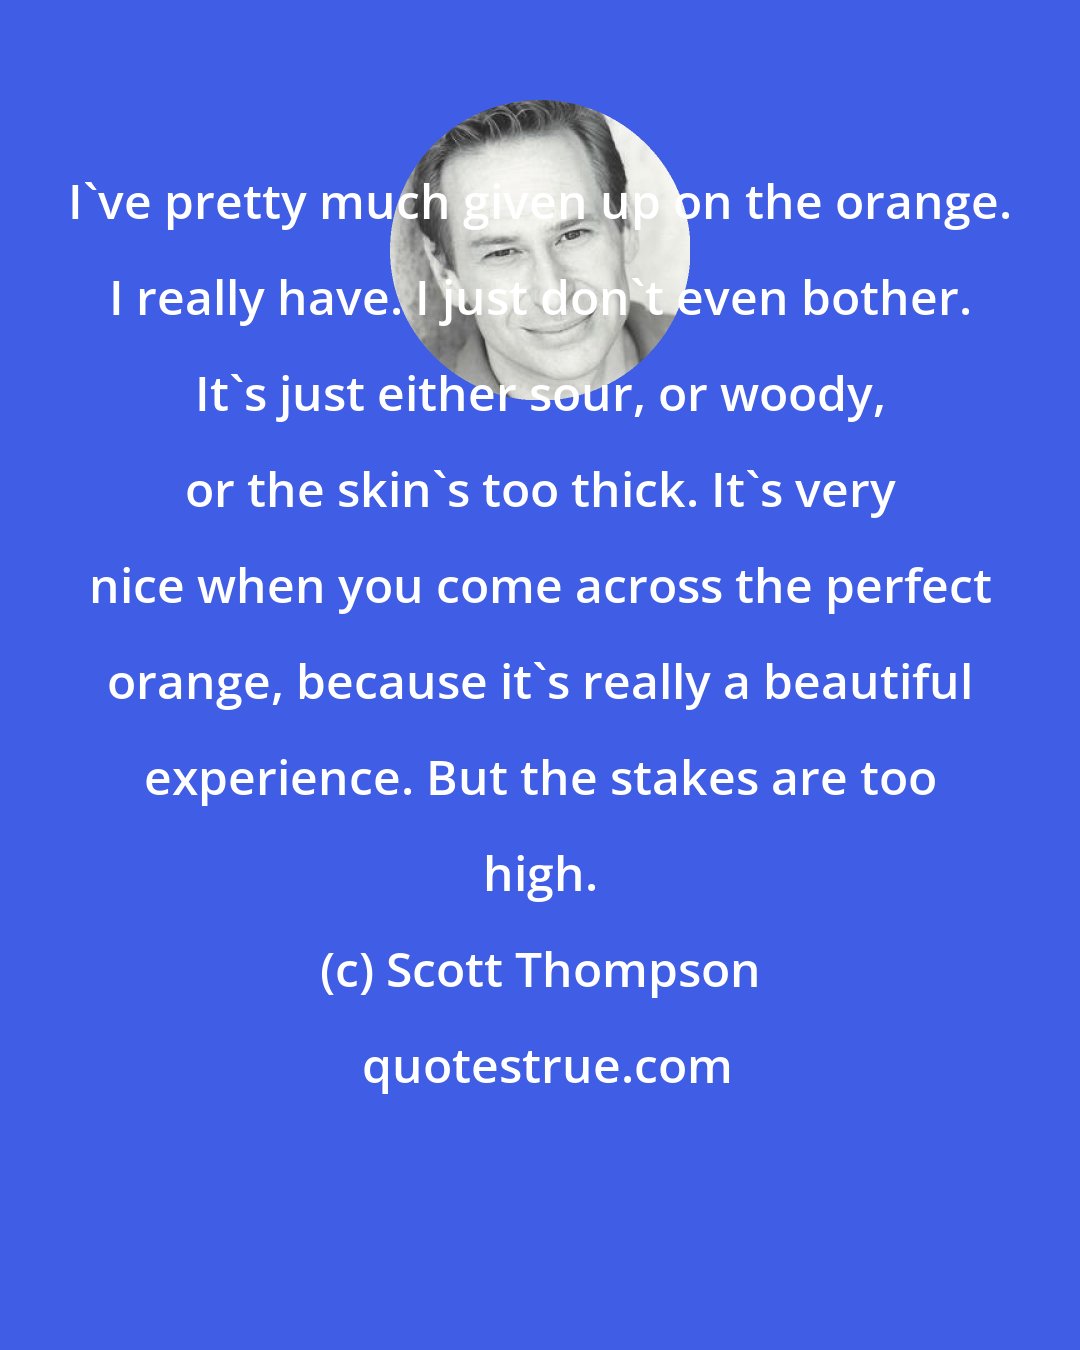 Scott Thompson: I've pretty much given up on the orange. I really have. I just don't even bother. It's just either sour, or woody, or the skin's too thick. It's very nice when you come across the perfect orange, because it's really a beautiful experience. But the stakes are too high.